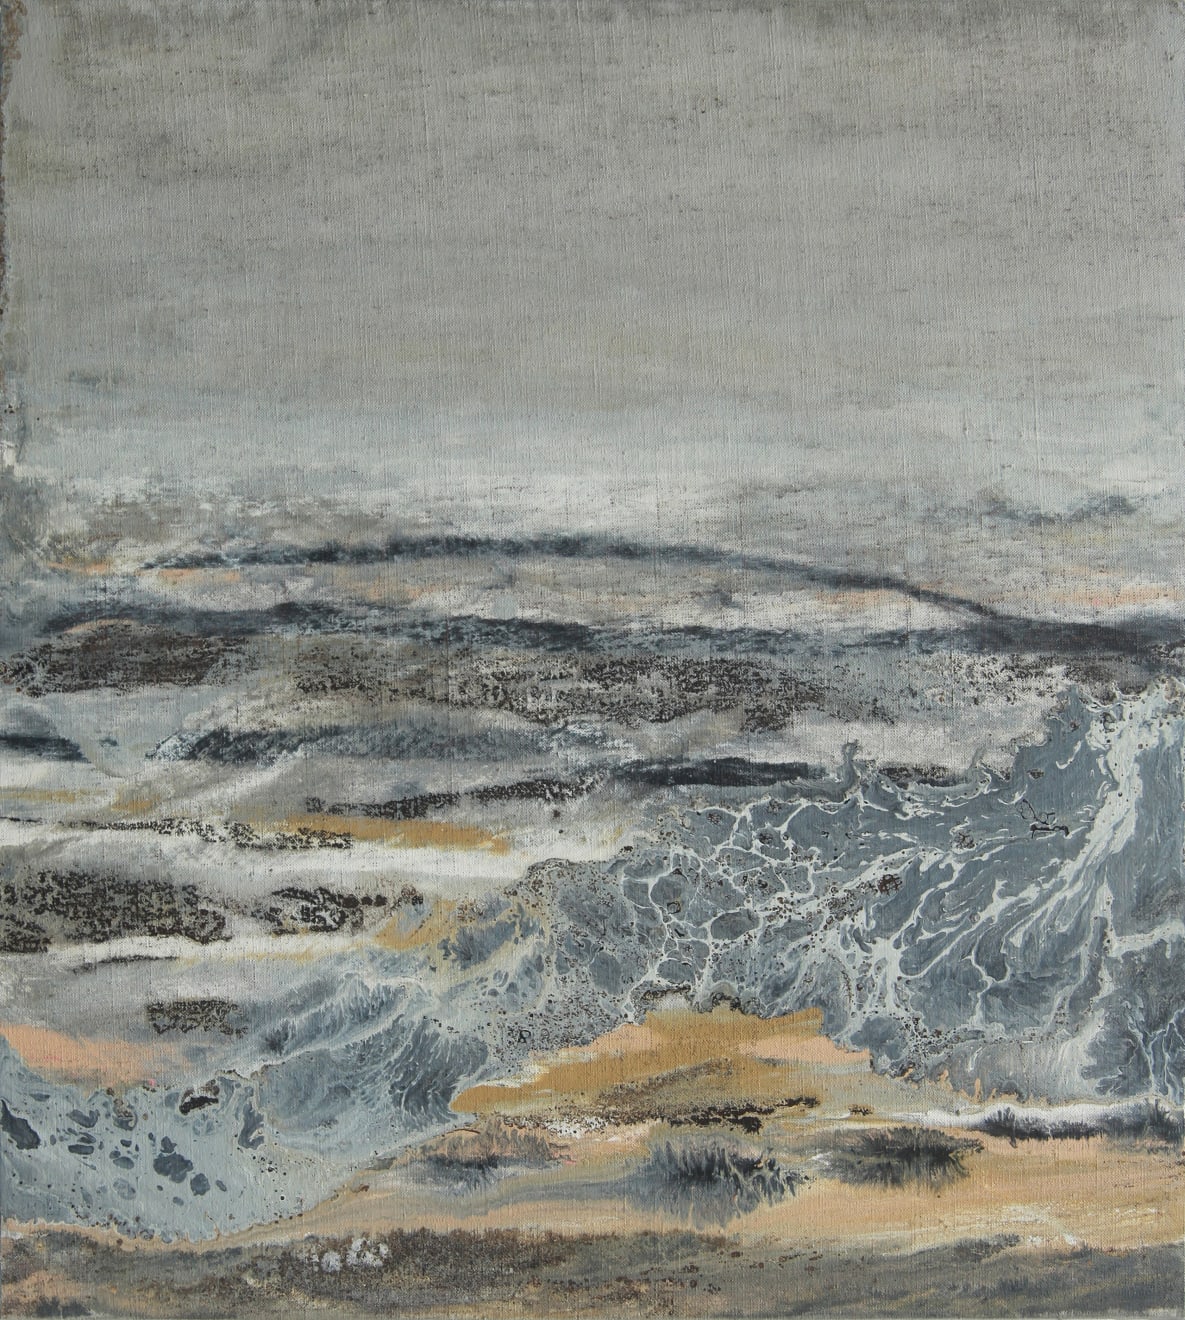 Estuary 02 Oil and Acrylic on Linen Mounted Board 53 x 63.5cm AUD $1400 SOLD